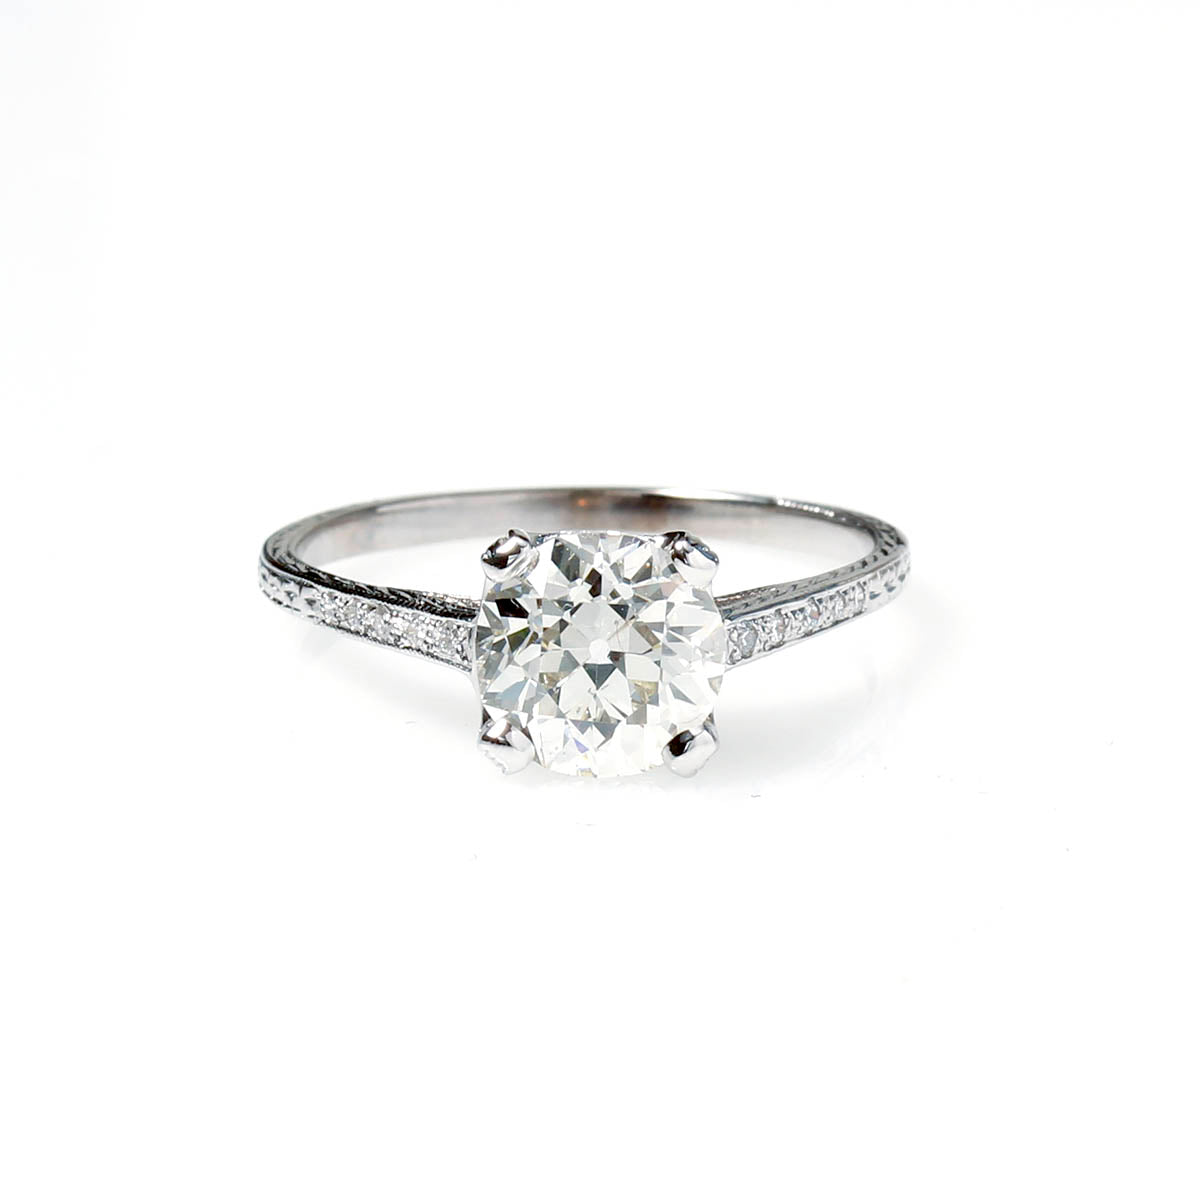 Replica Art Deco Engagement Ring with Vintage Diamond #3299-3